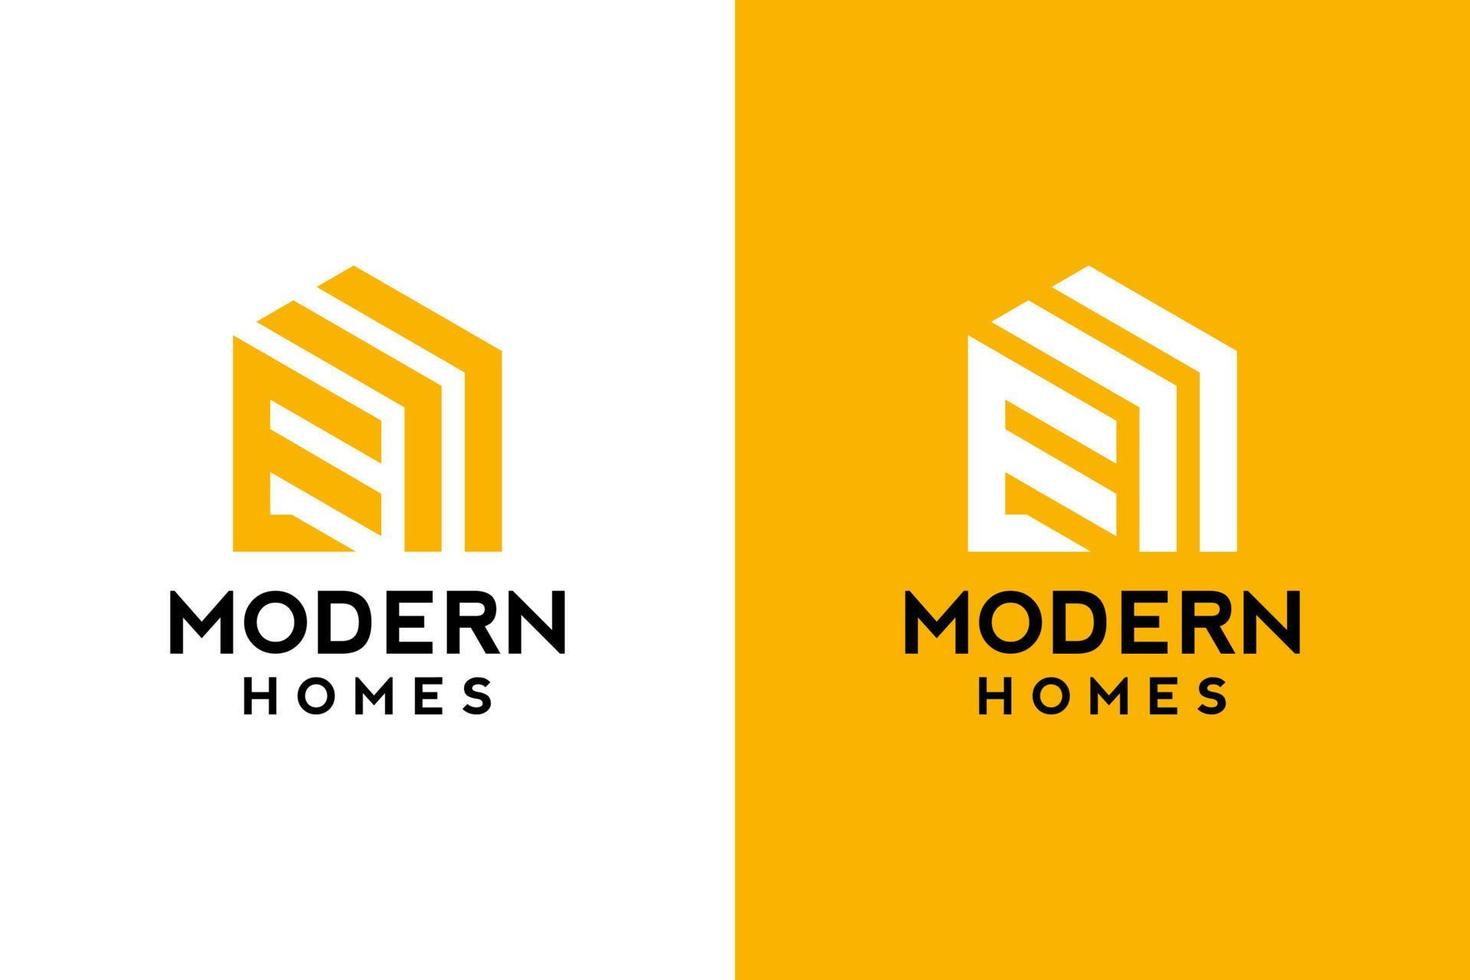 Logo design of E in vector for construction, home, real estate, building, property. Minimal awesome trendy professional logo design template on double background.